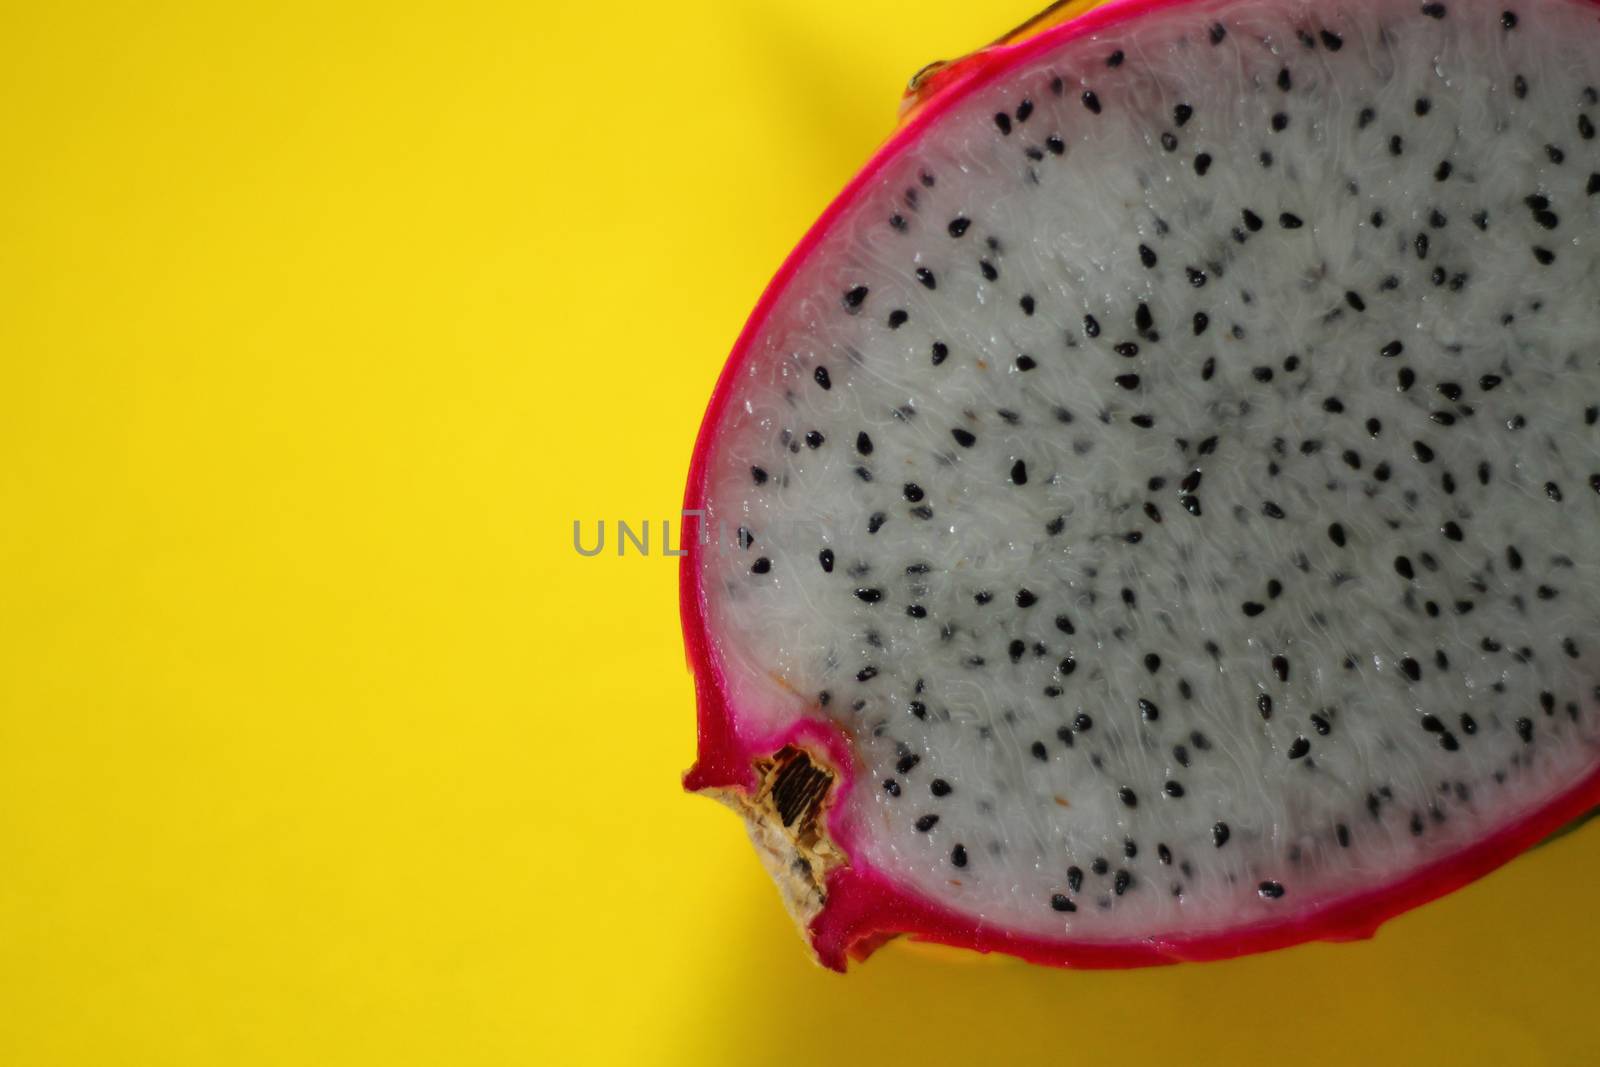 Minimalist tropical summer theme background of a sliced dragon fruit against a yellow background